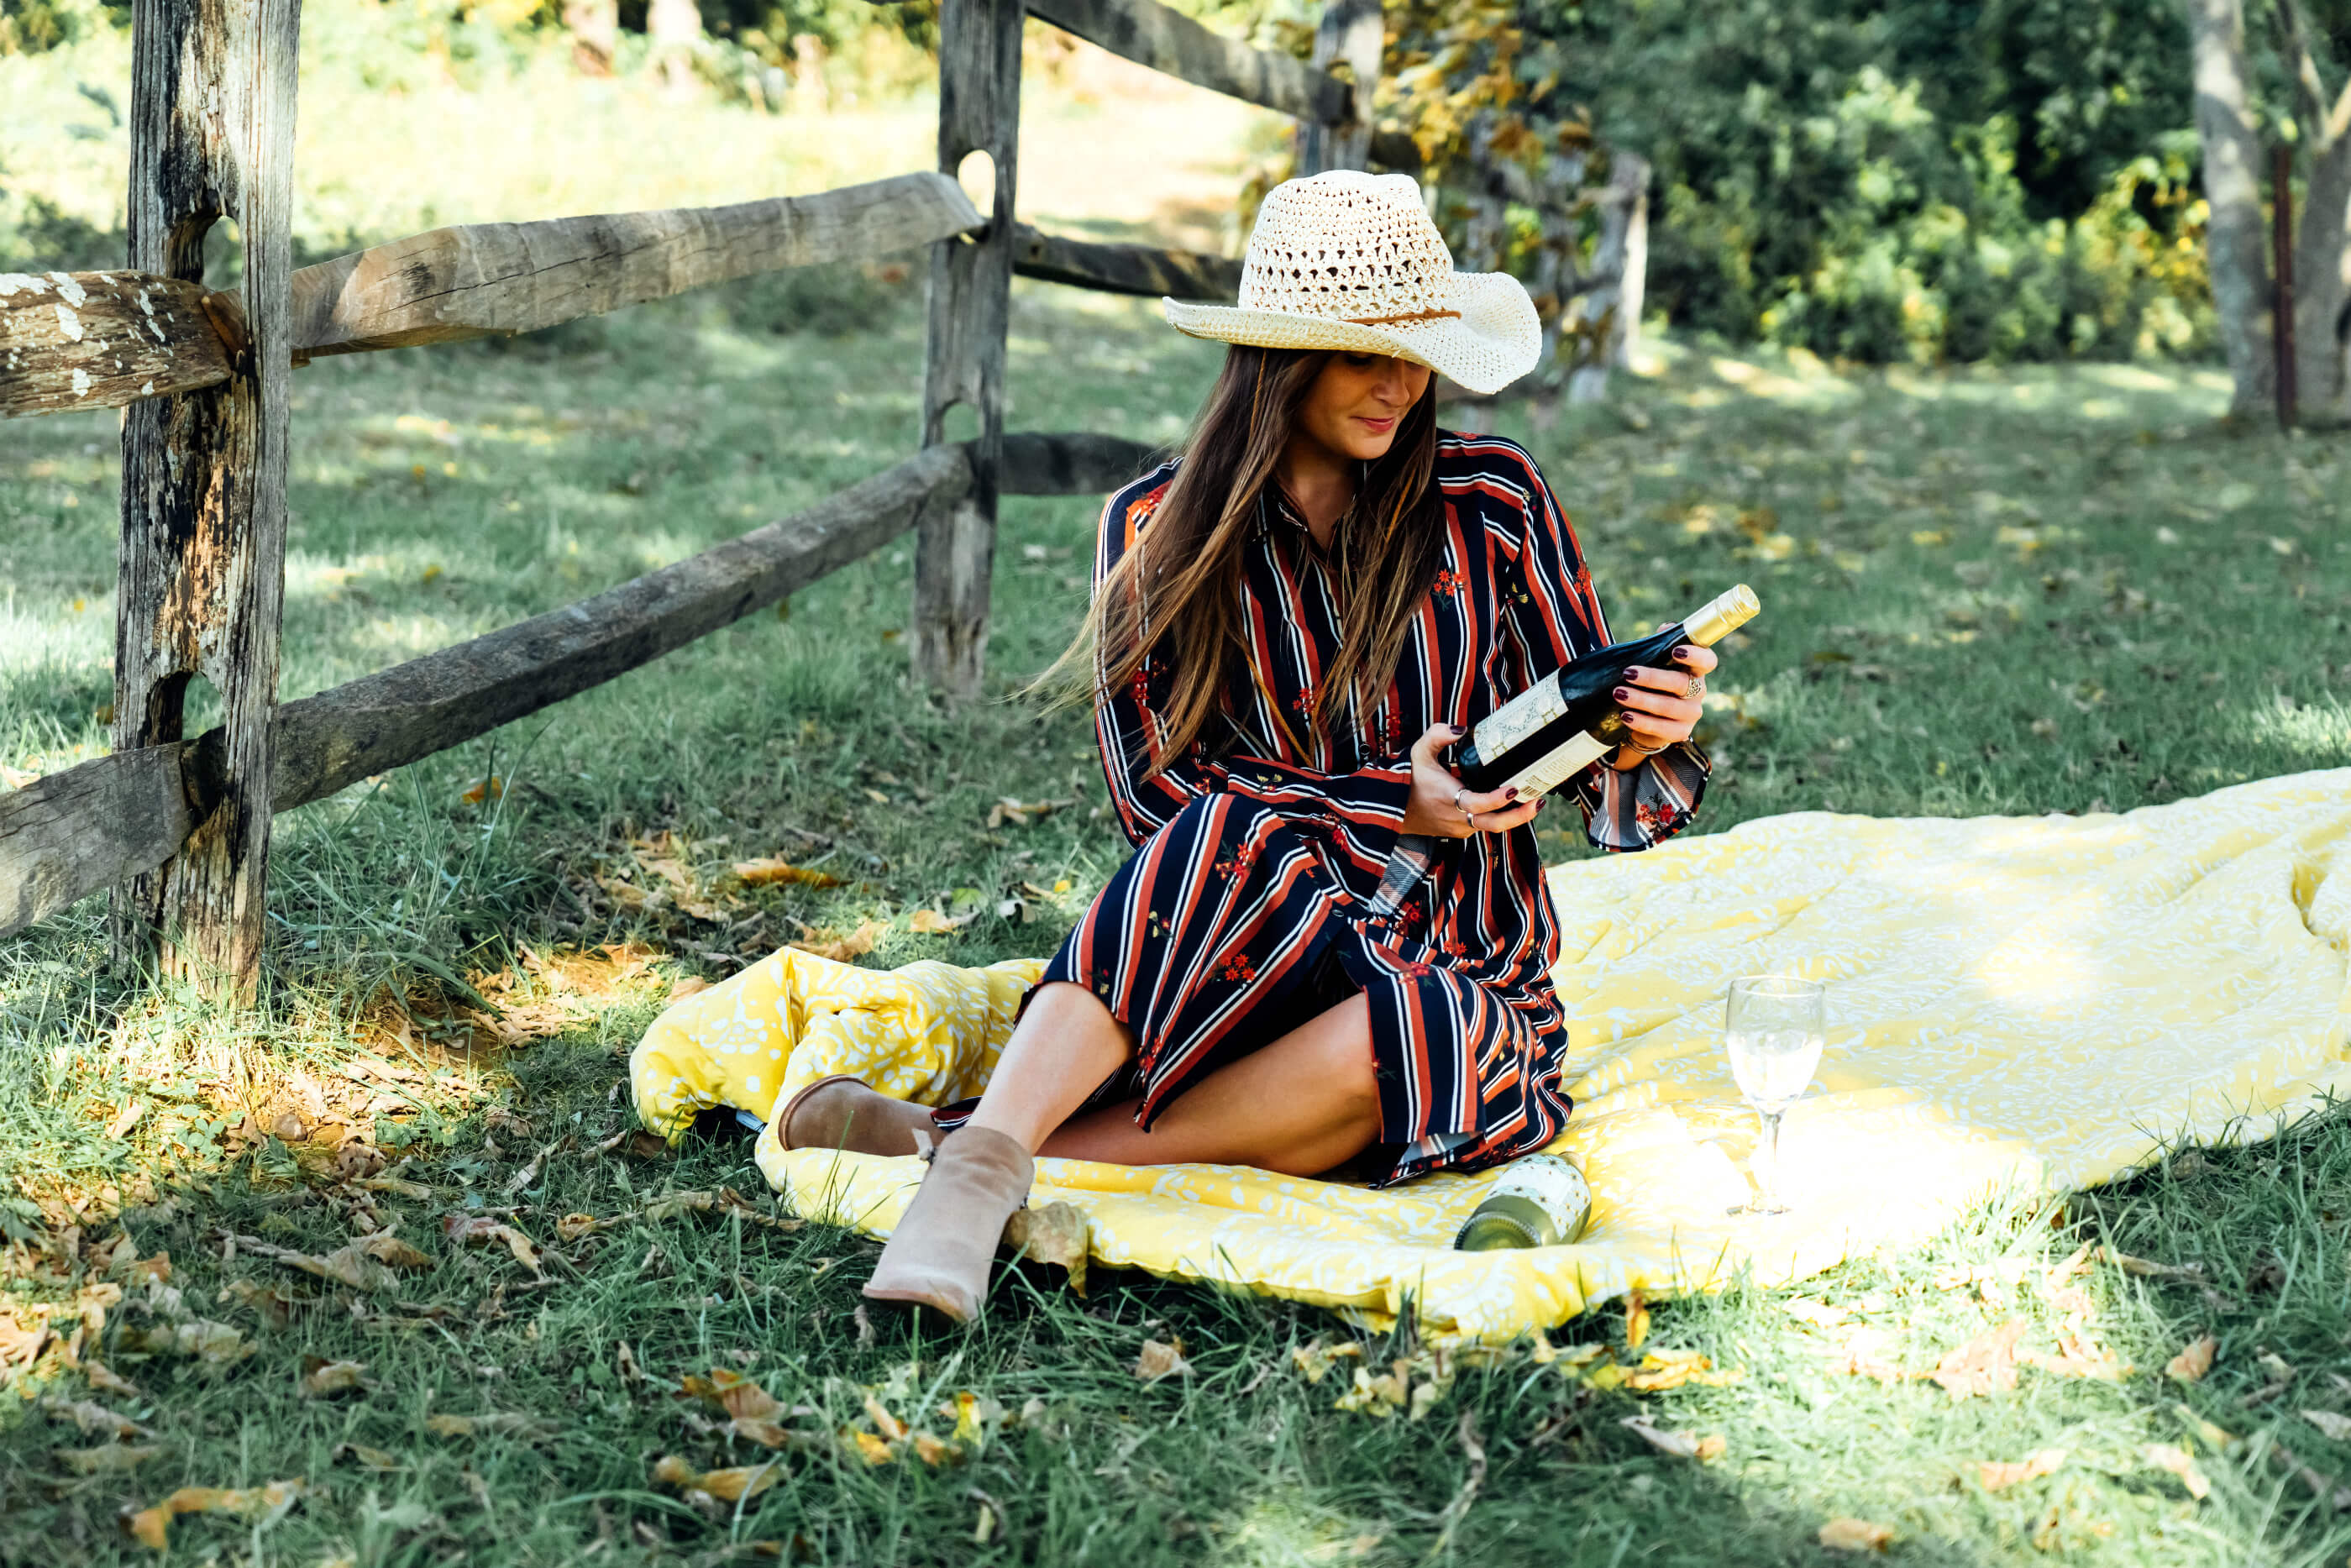 Miss Me Stripe Midi Shirtdress with Floral Embroidery, Straw Hat, Fall Dress Outfit Idea, AVA Grace Vineyards, Tilden of To Be Bright